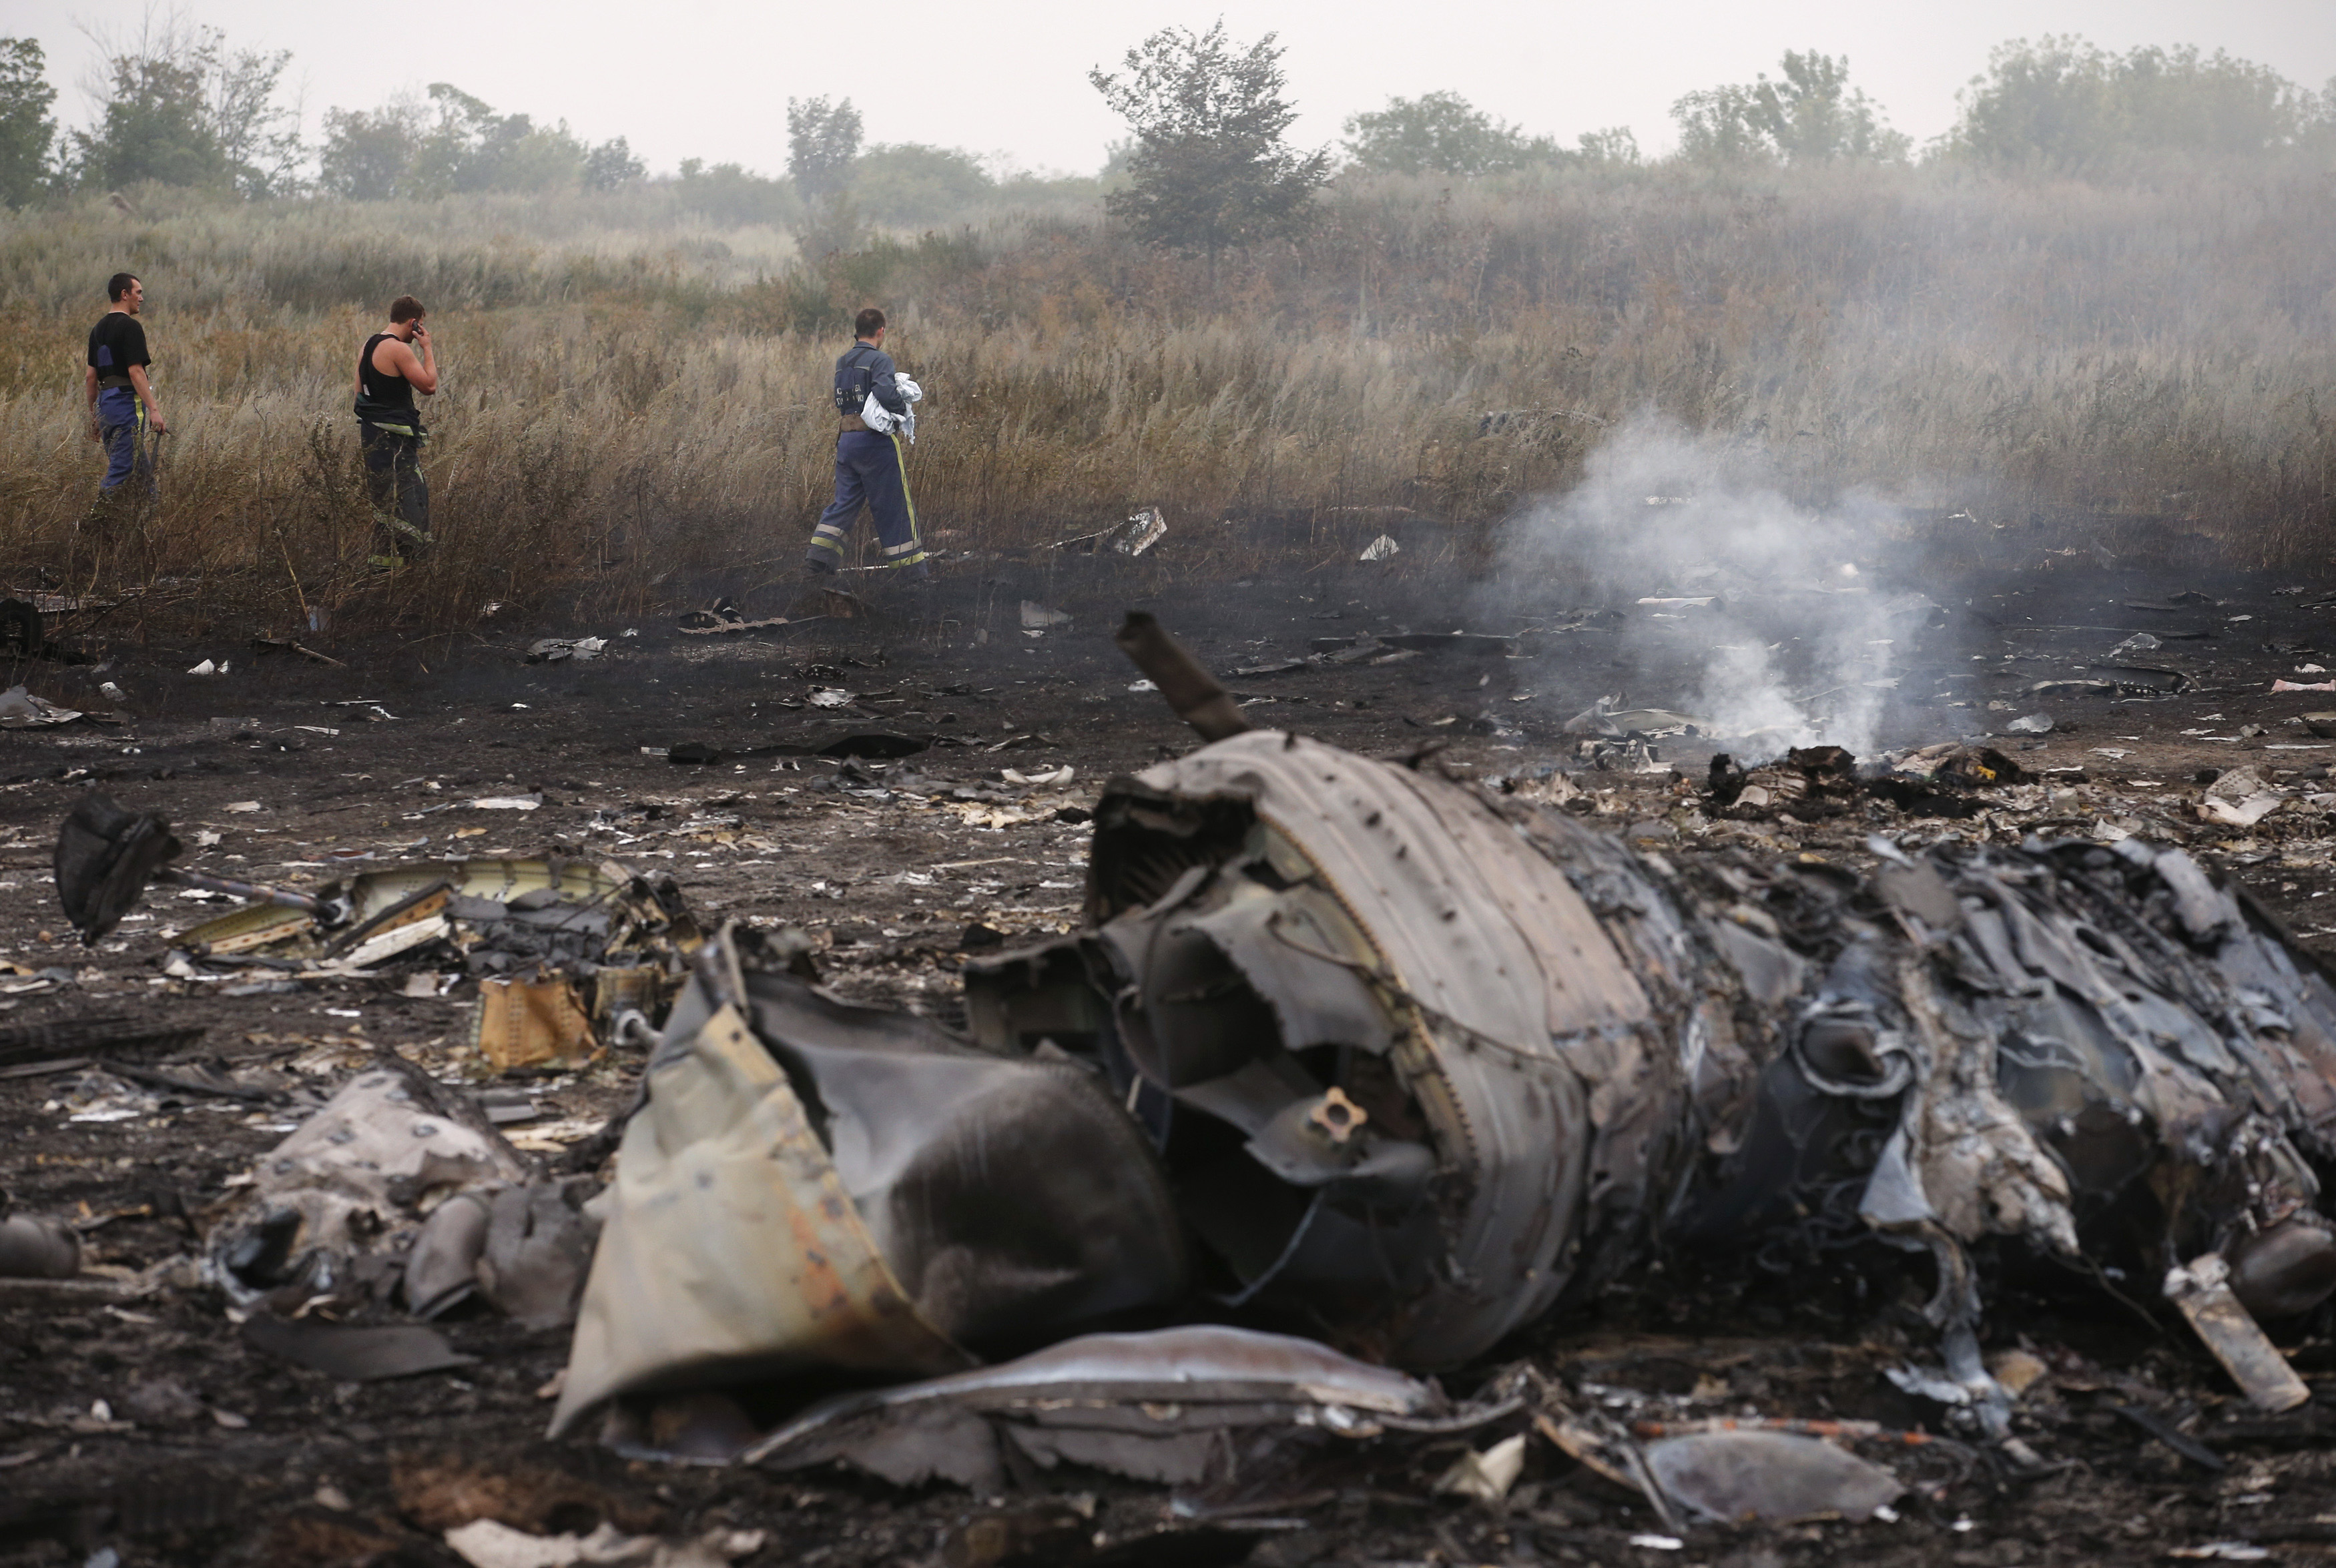 Emergencies Ministry members walk at the site of a Malaysia Airlines Boeing 777 plane crash, MH17, near the settlement of Grabovo in the Donetsk region, on July 17, 2014. (Maxim Zmeyev&mdash;Reuters)